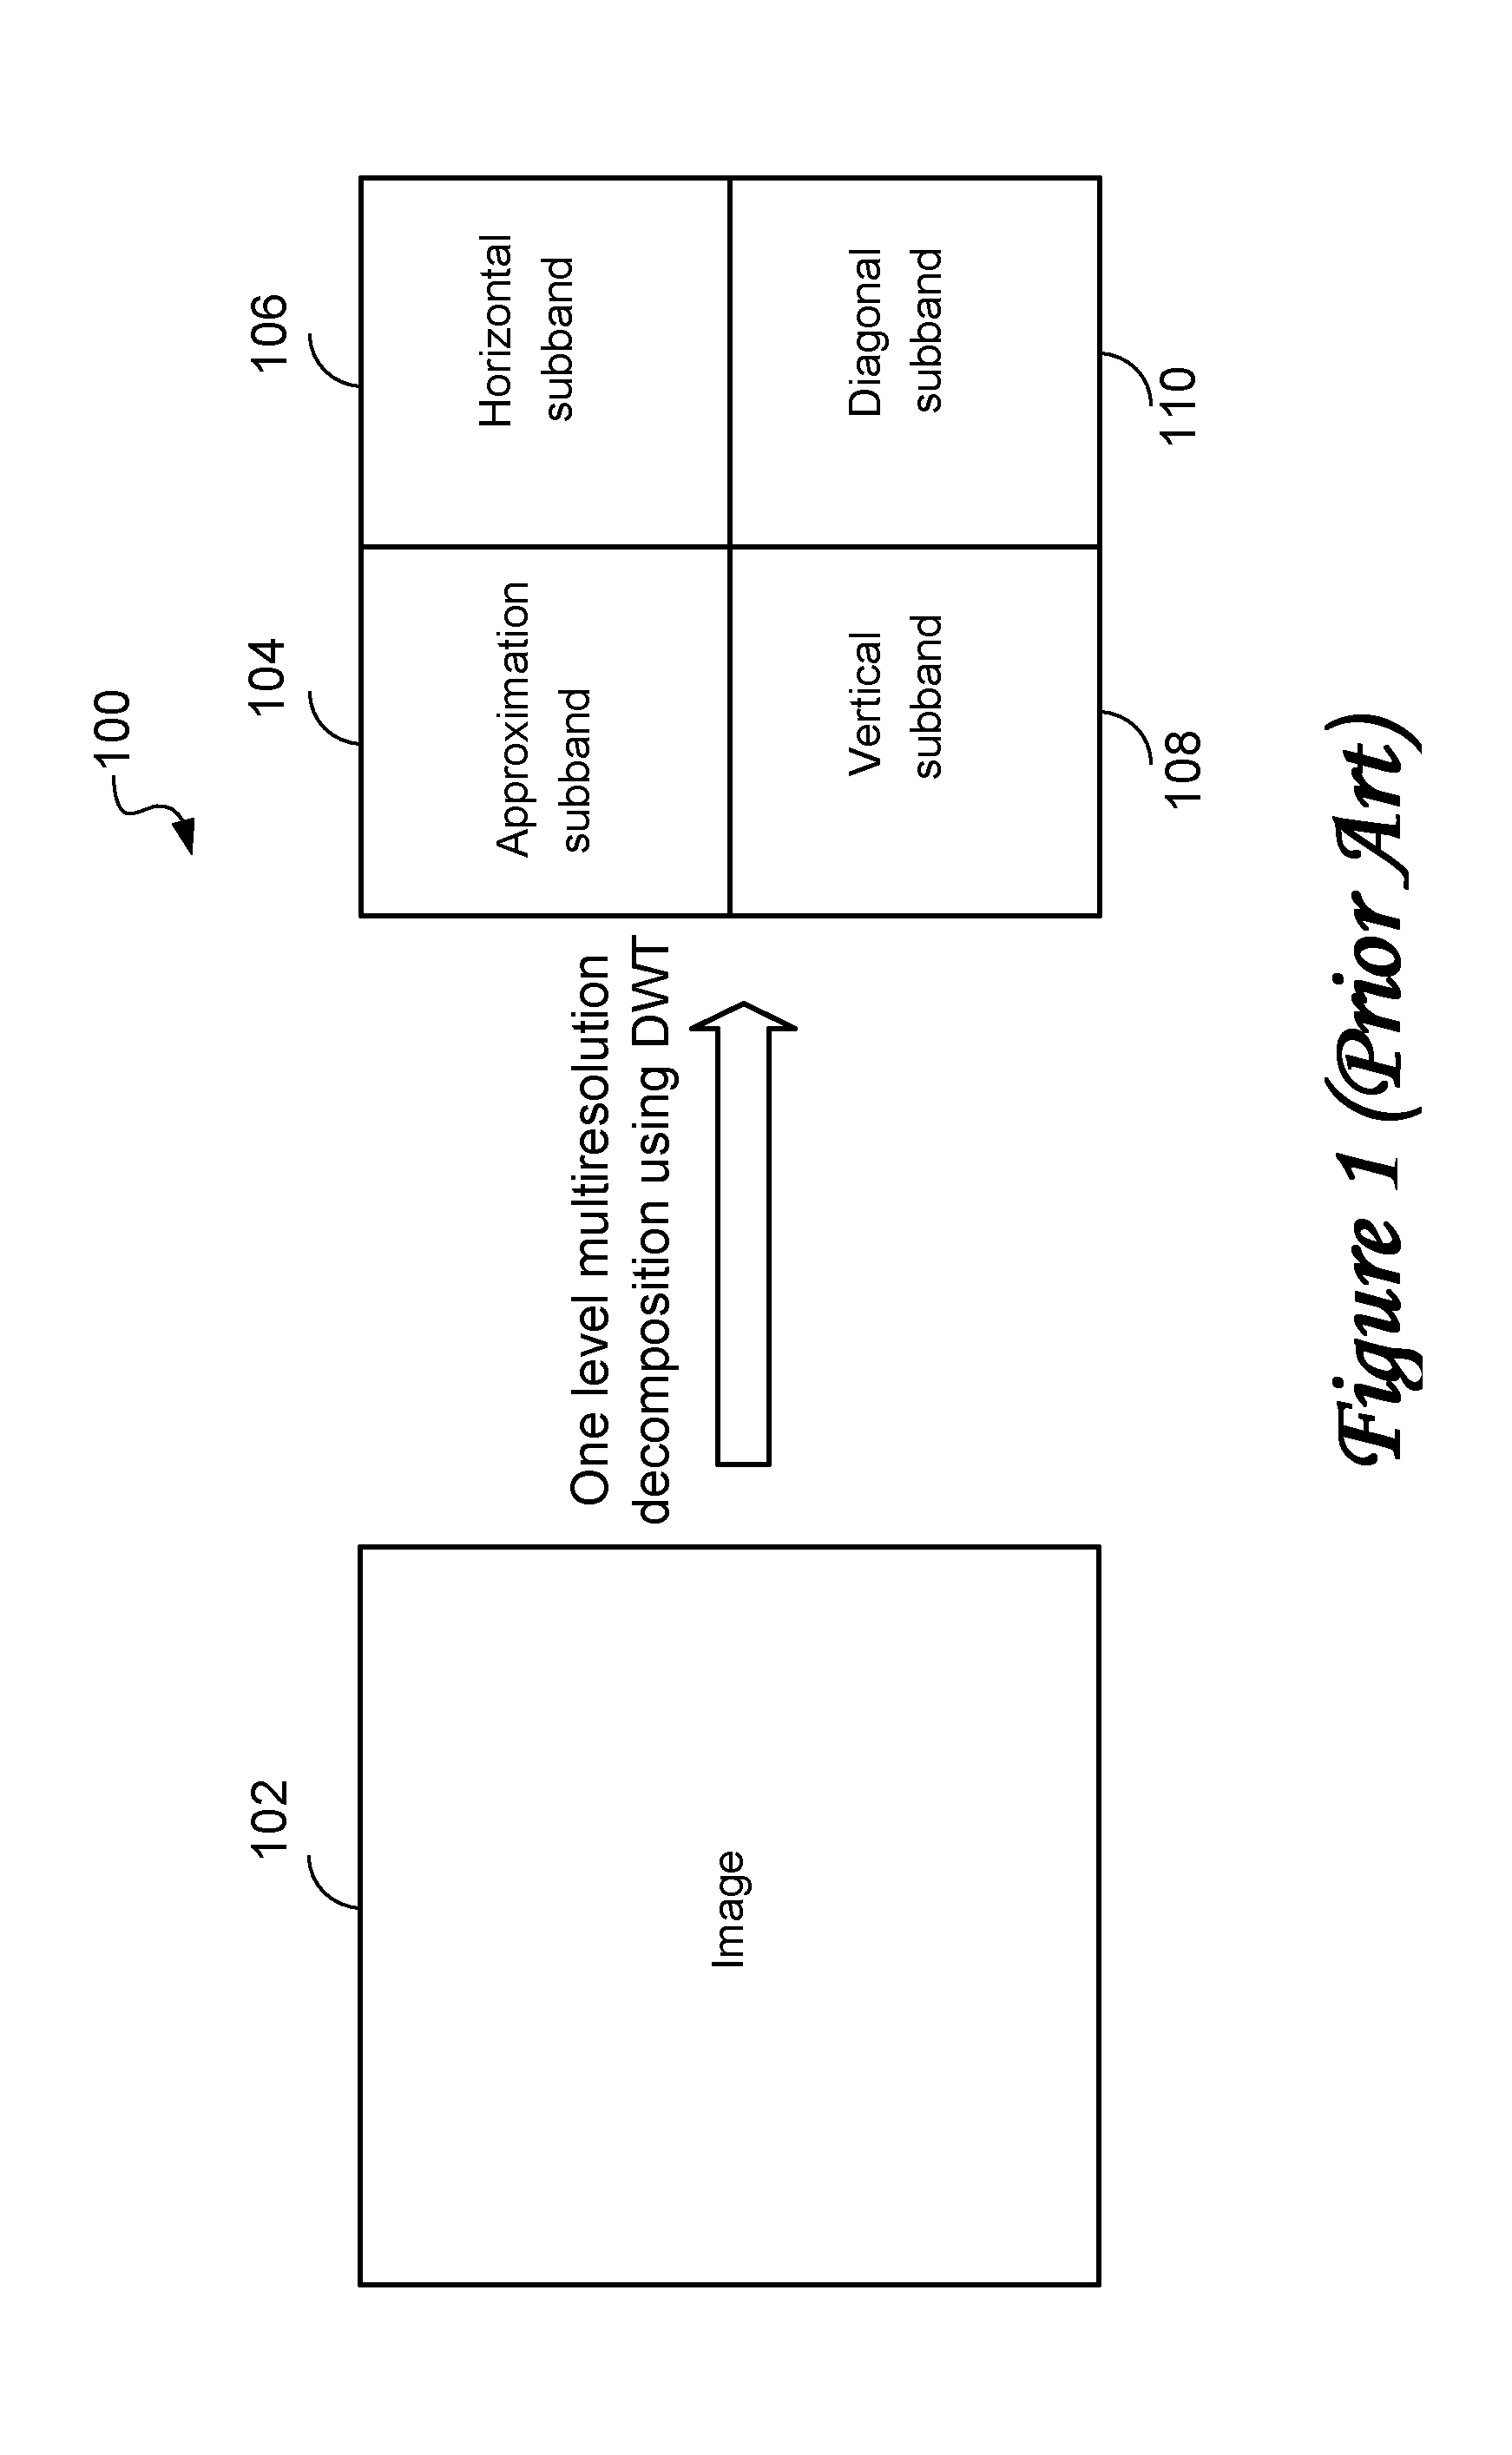 Method and system for determining structural similarity between images